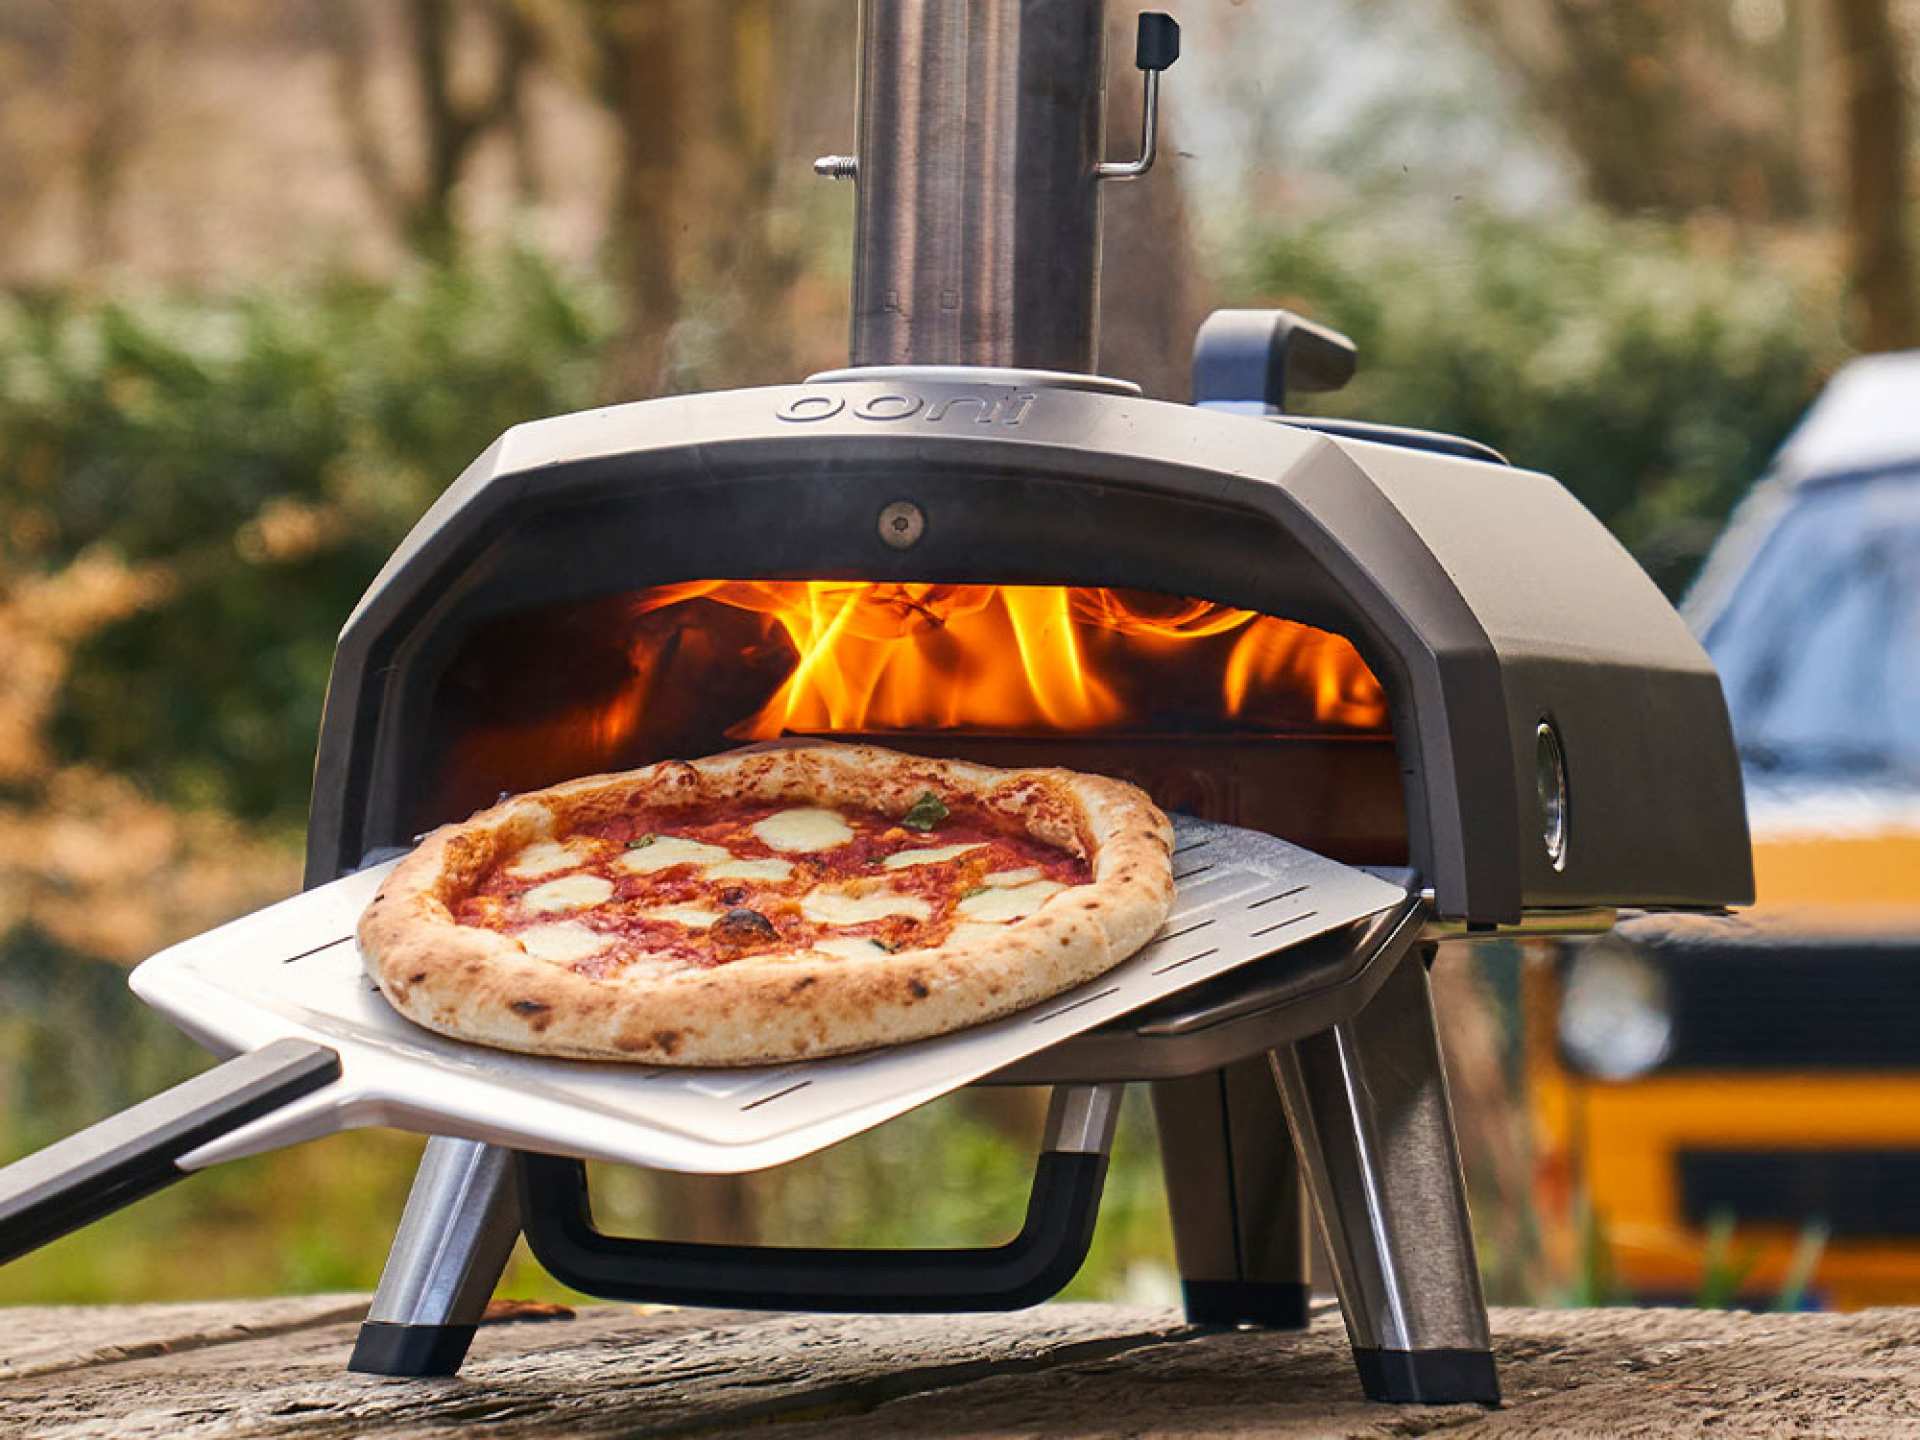 Taking a pizza out of the Ooni Karu 12G pizza oven